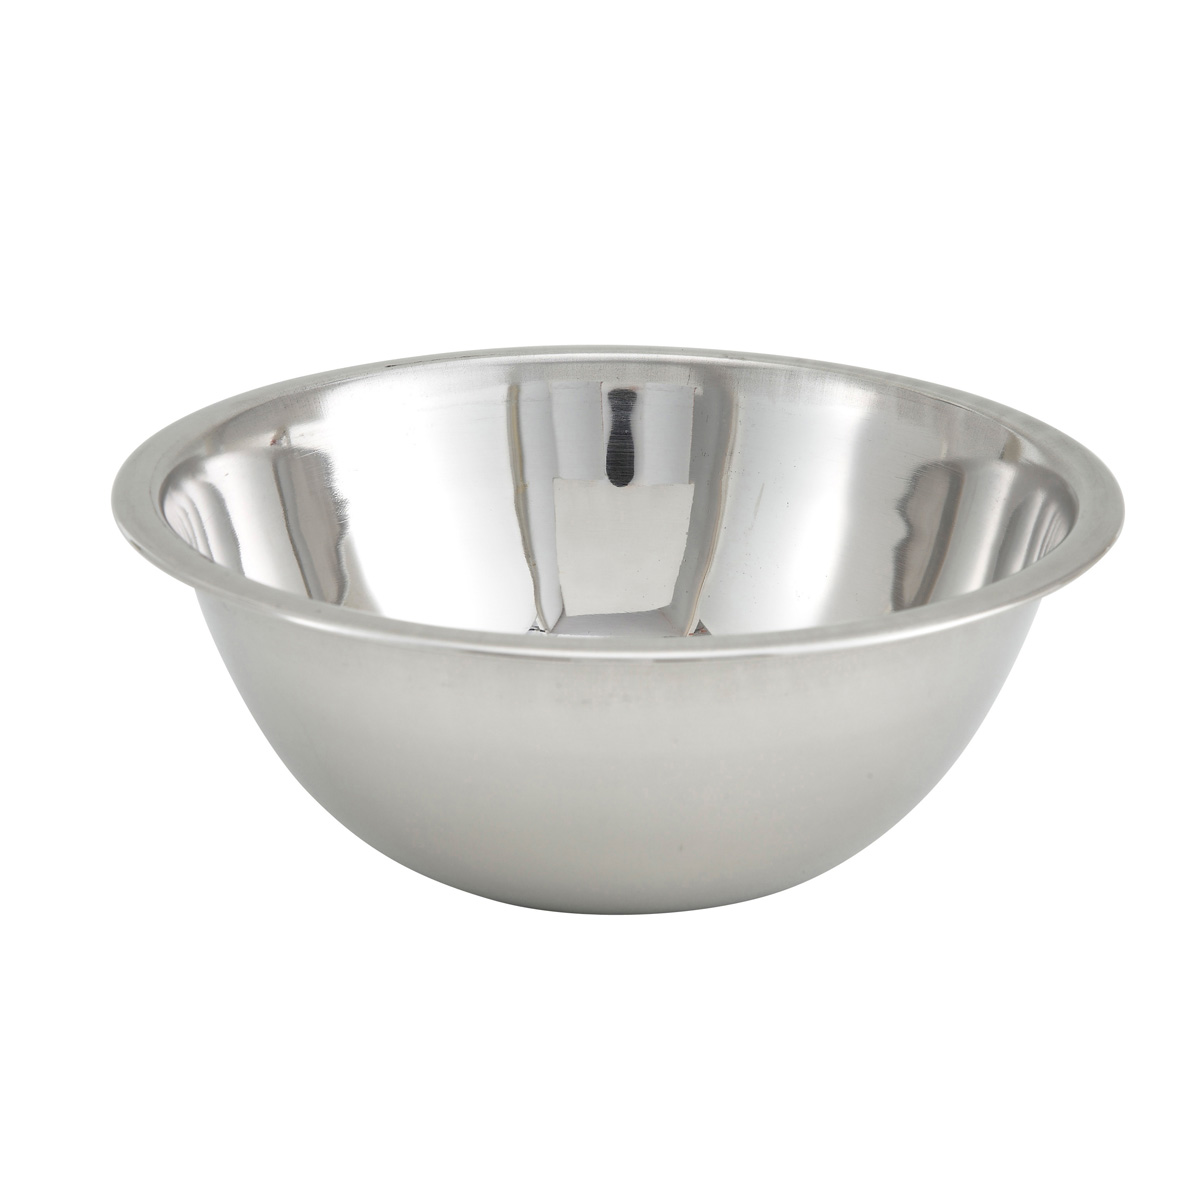 Winco MXBT-400Q 4 quarts, 11" dia, 3-3/4"H Stainless Steel Mixing Bowl